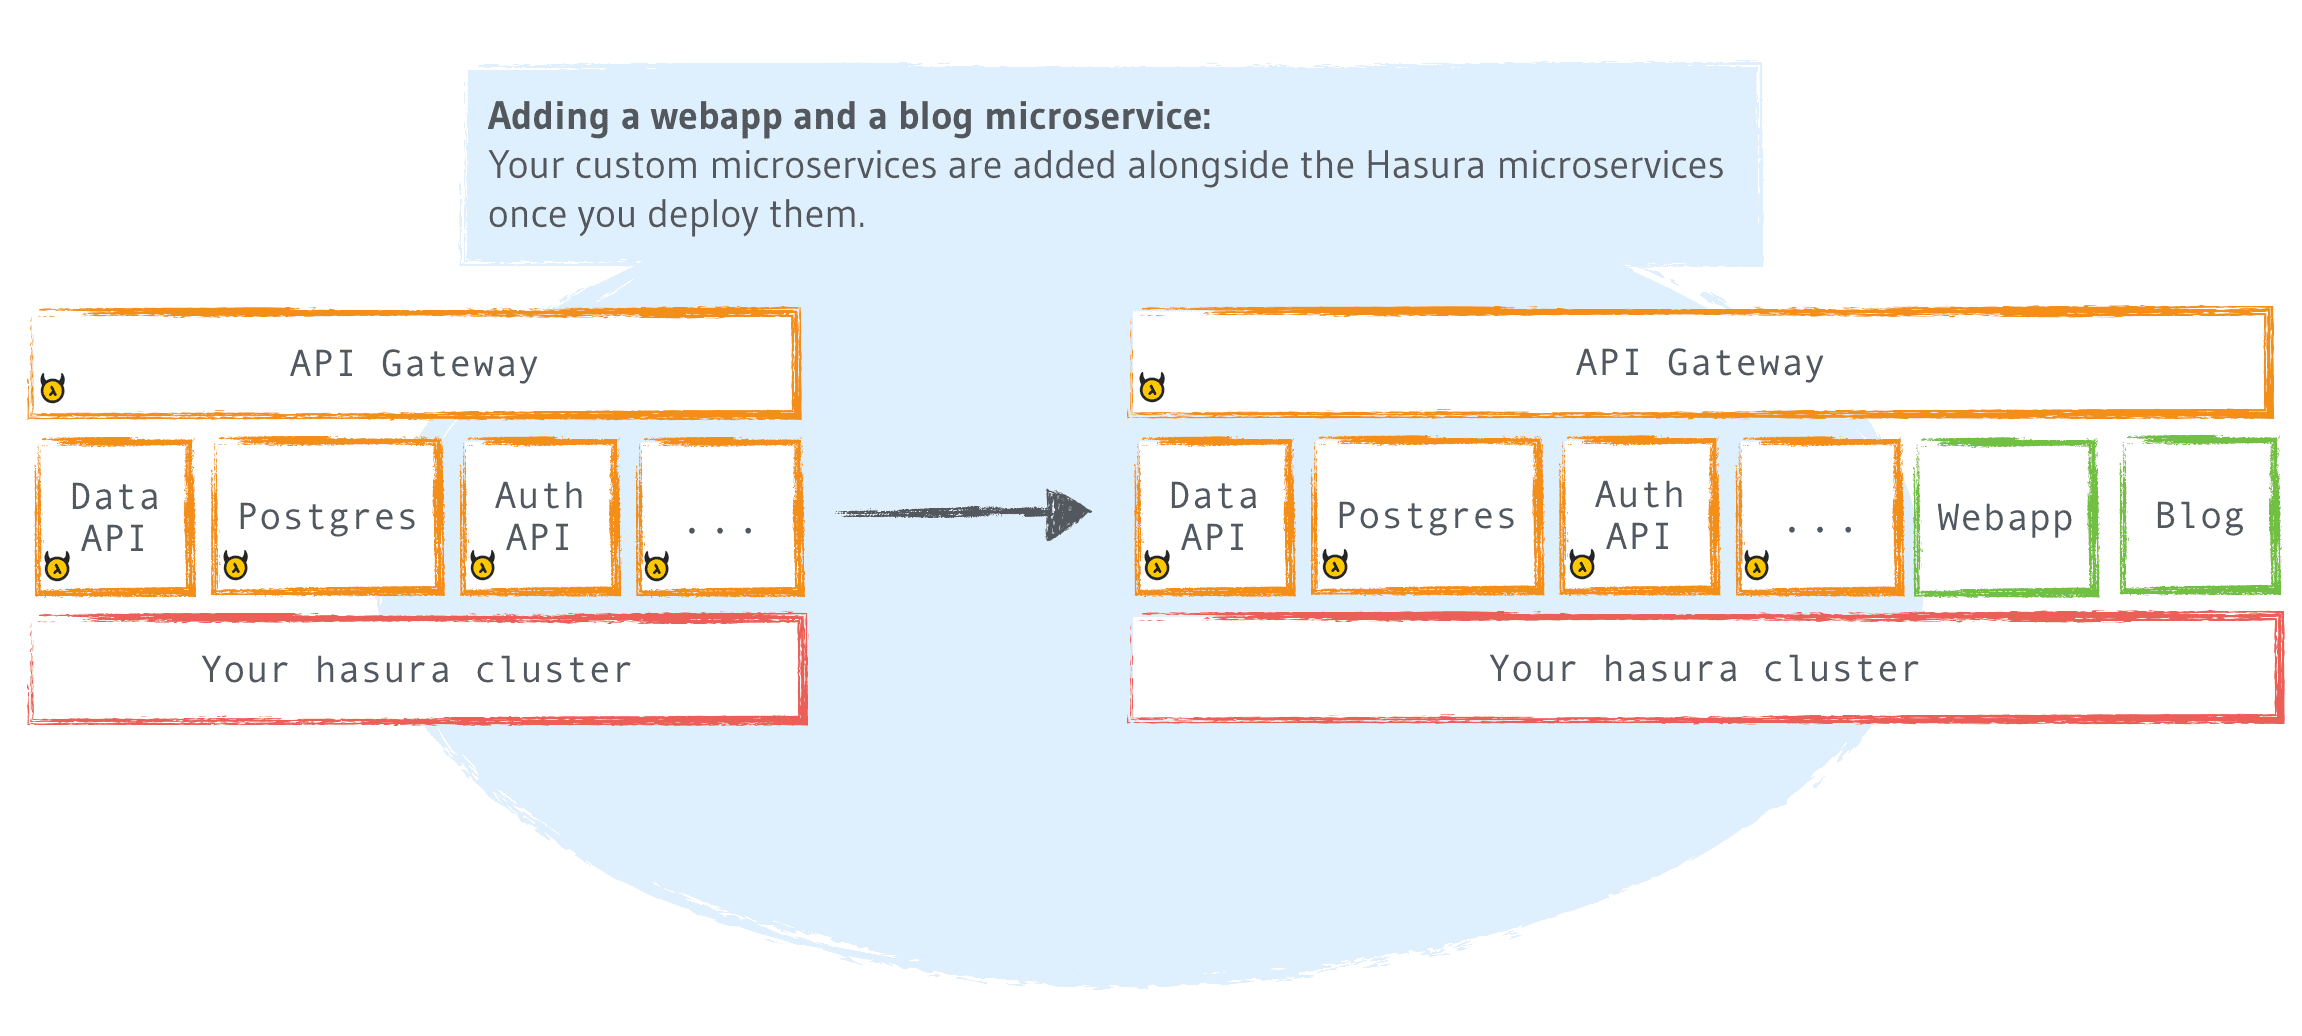 ../../../_images/adding-custom-microservices.png